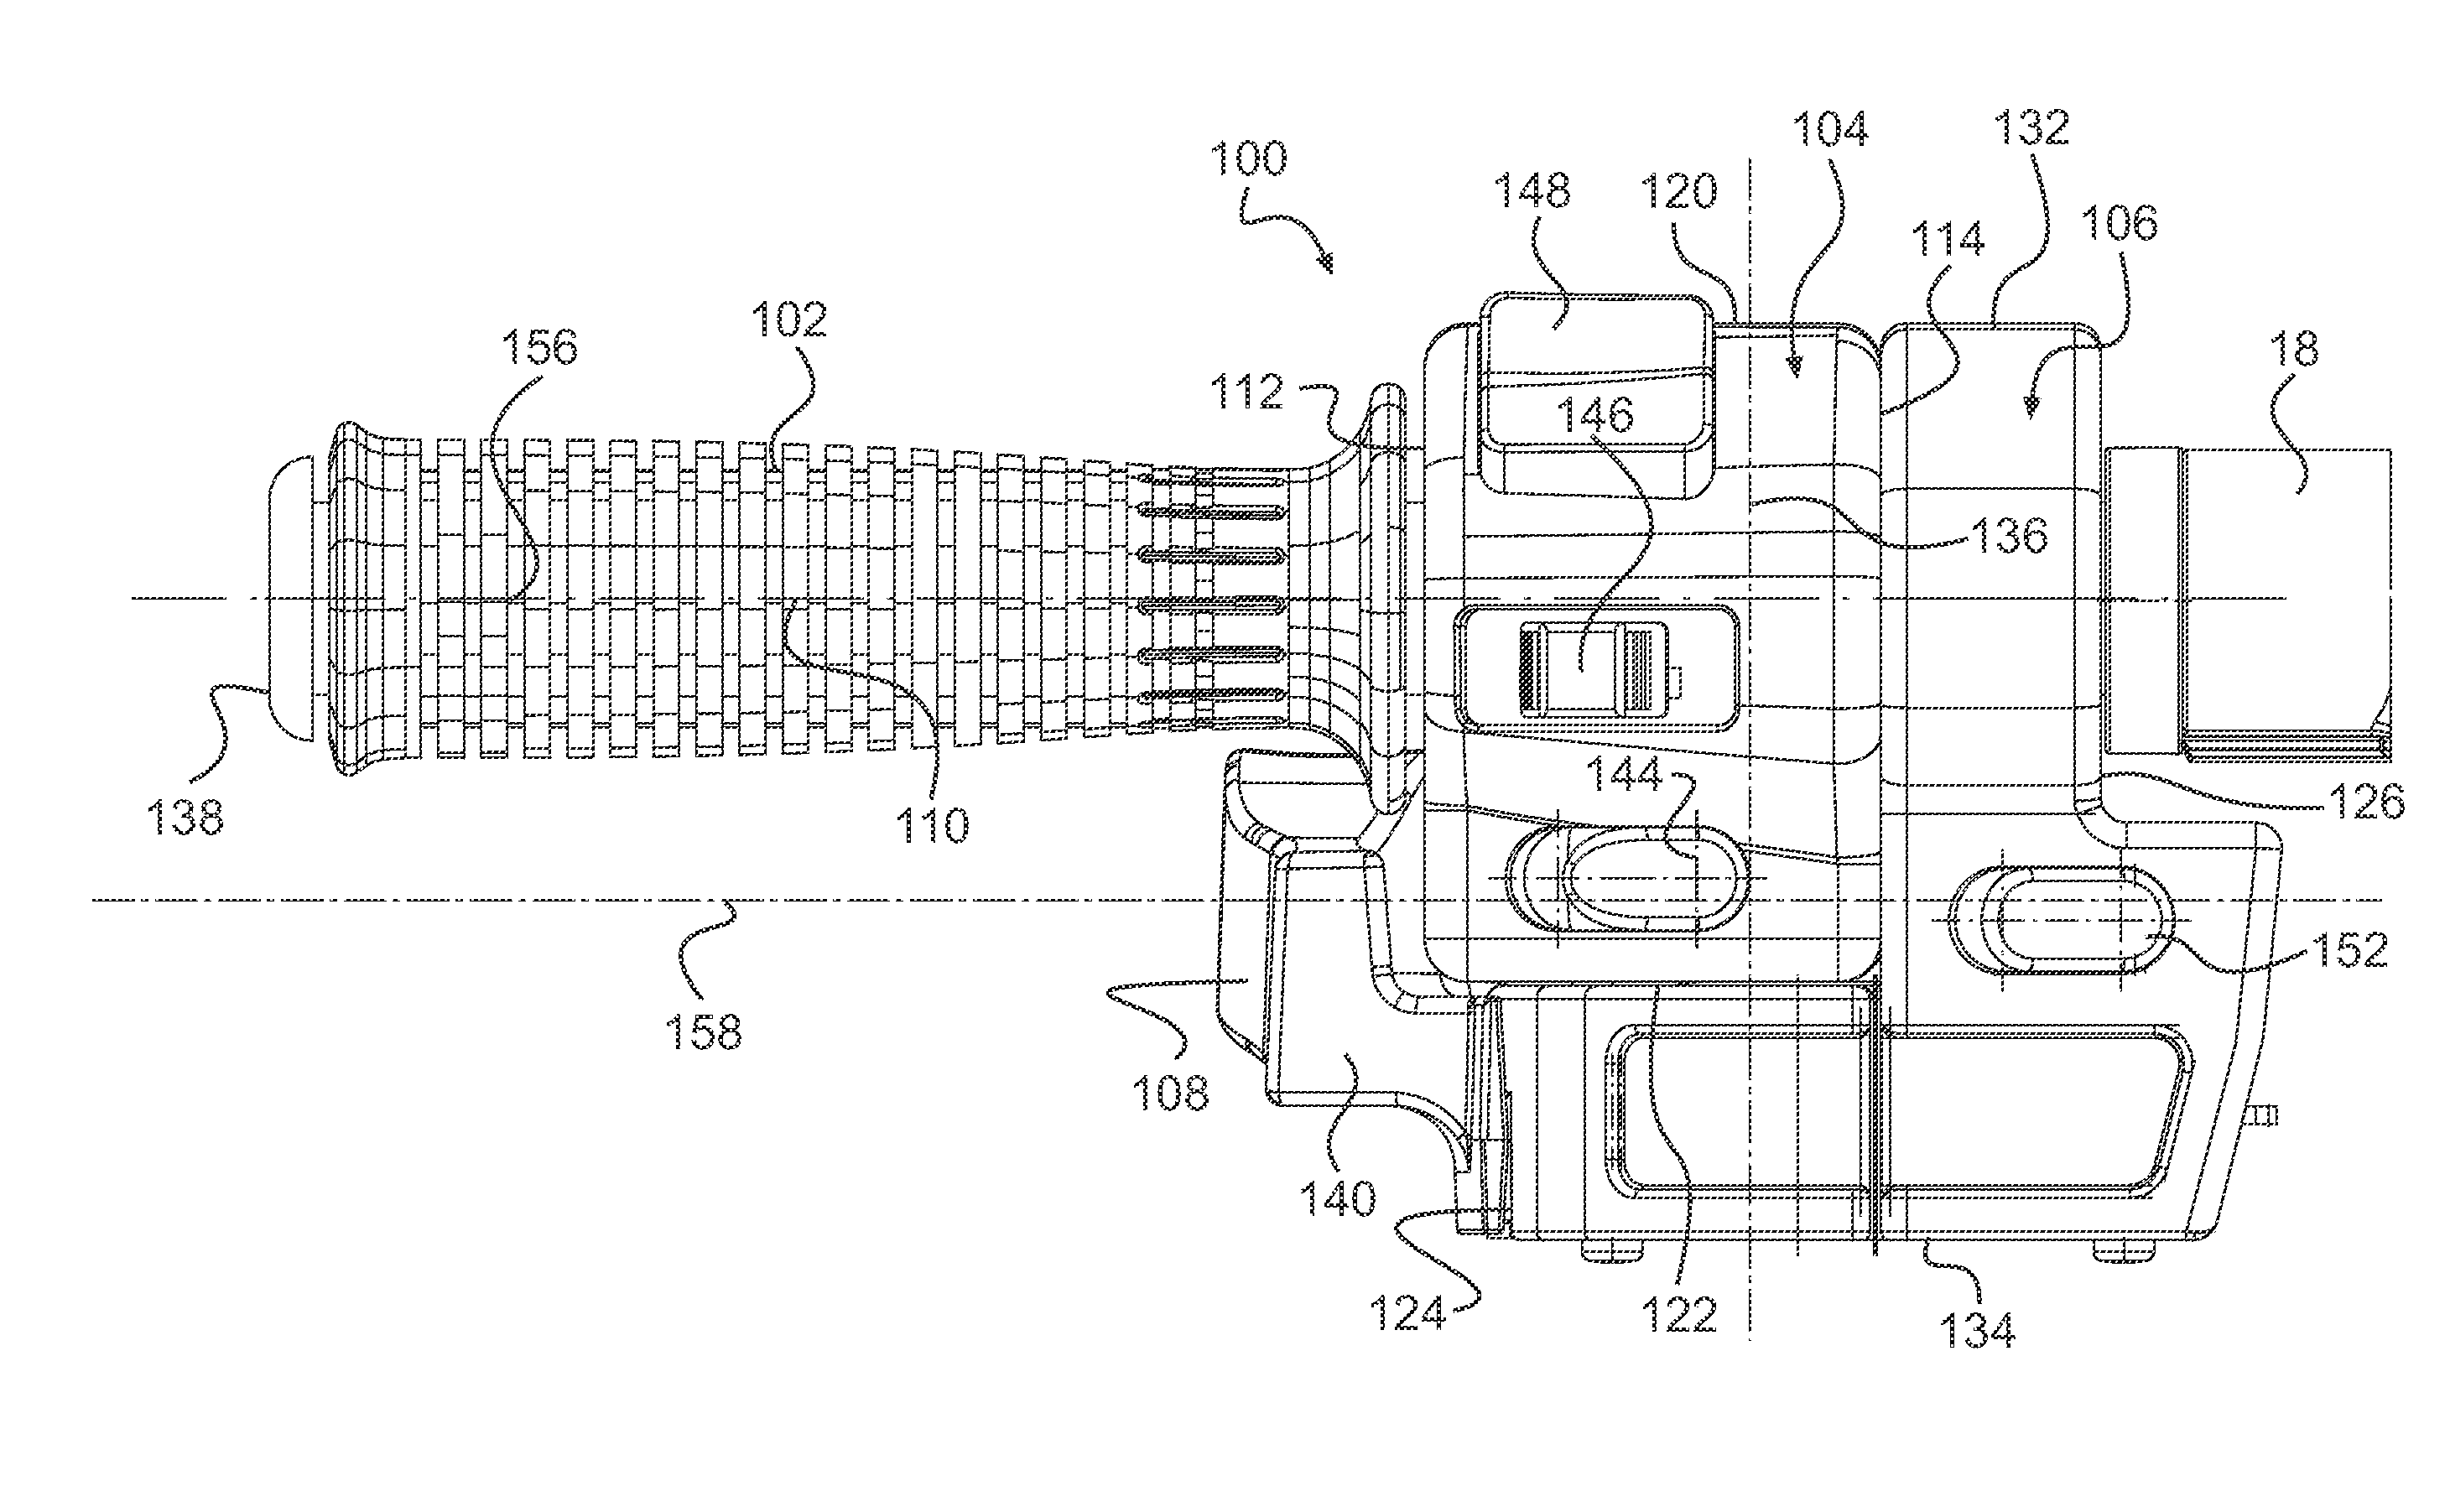 Vehicle with a semi-automatic transmission having a reverse gear